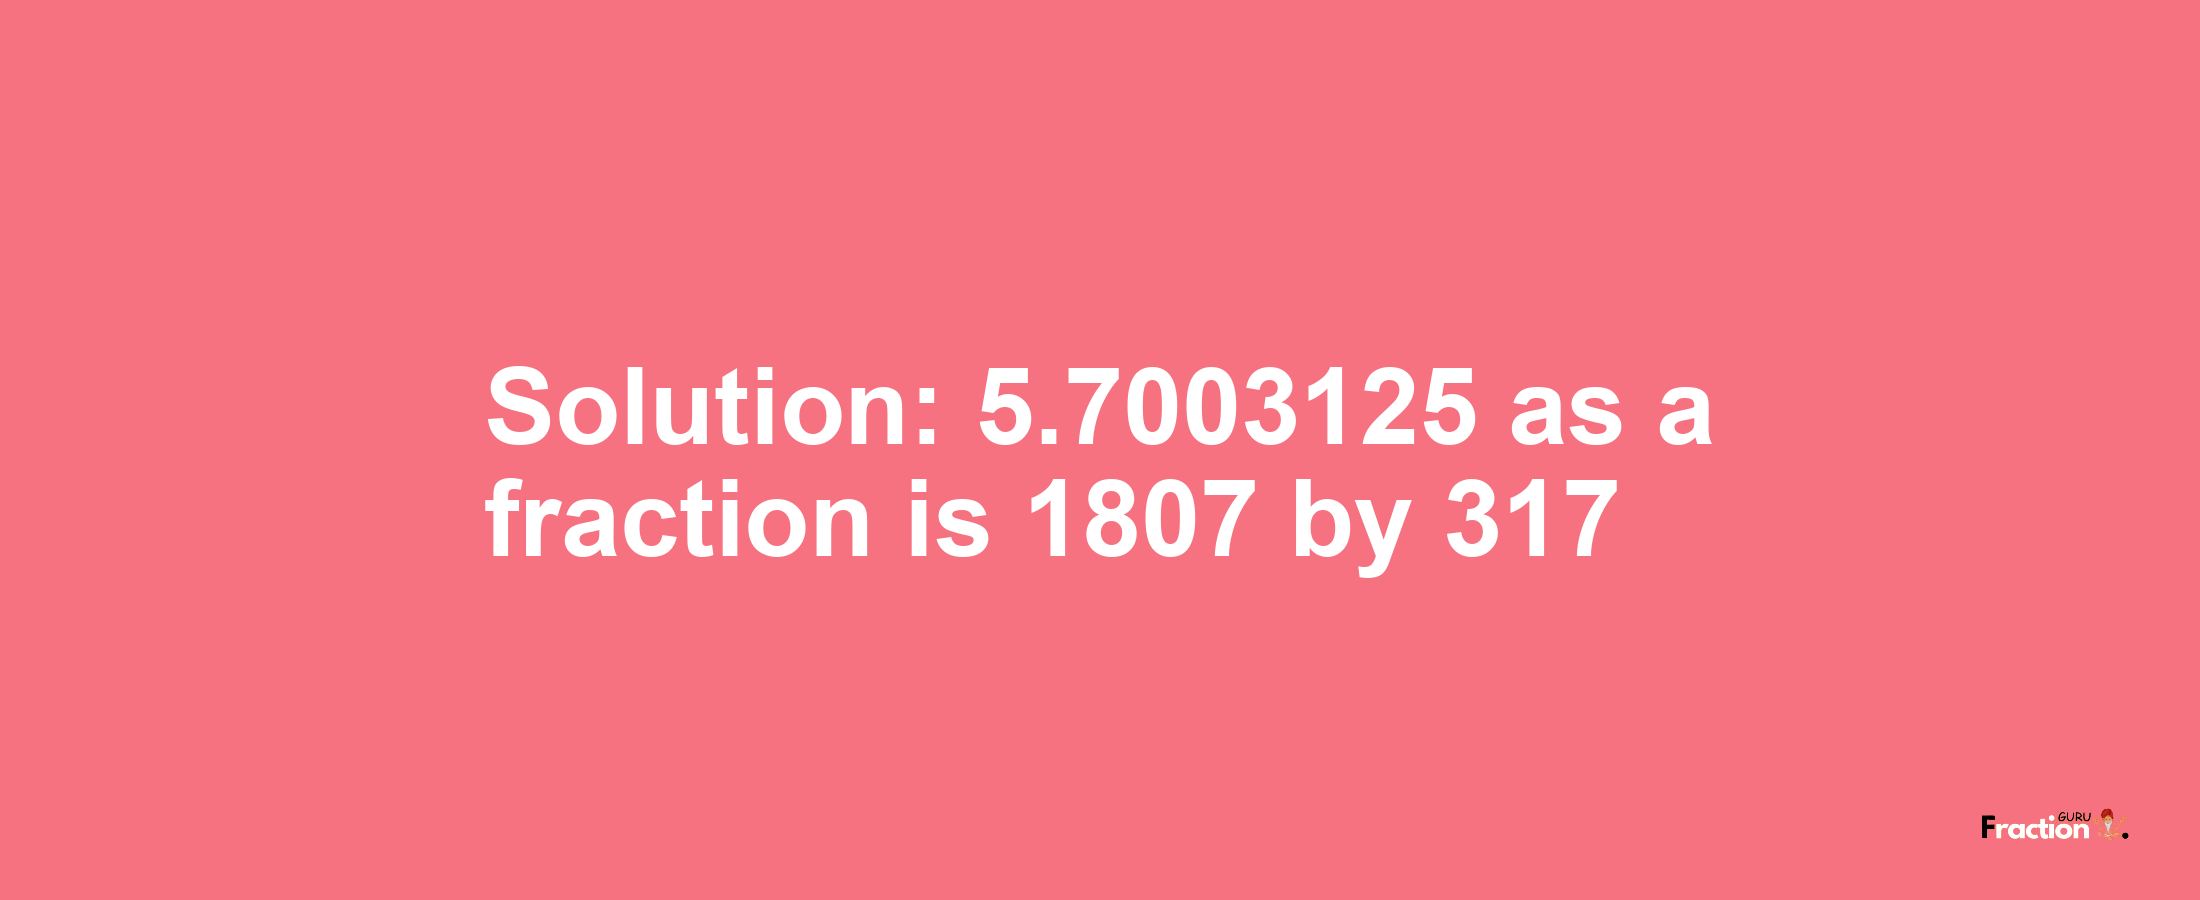 Solution:5.7003125 as a fraction is 1807/317